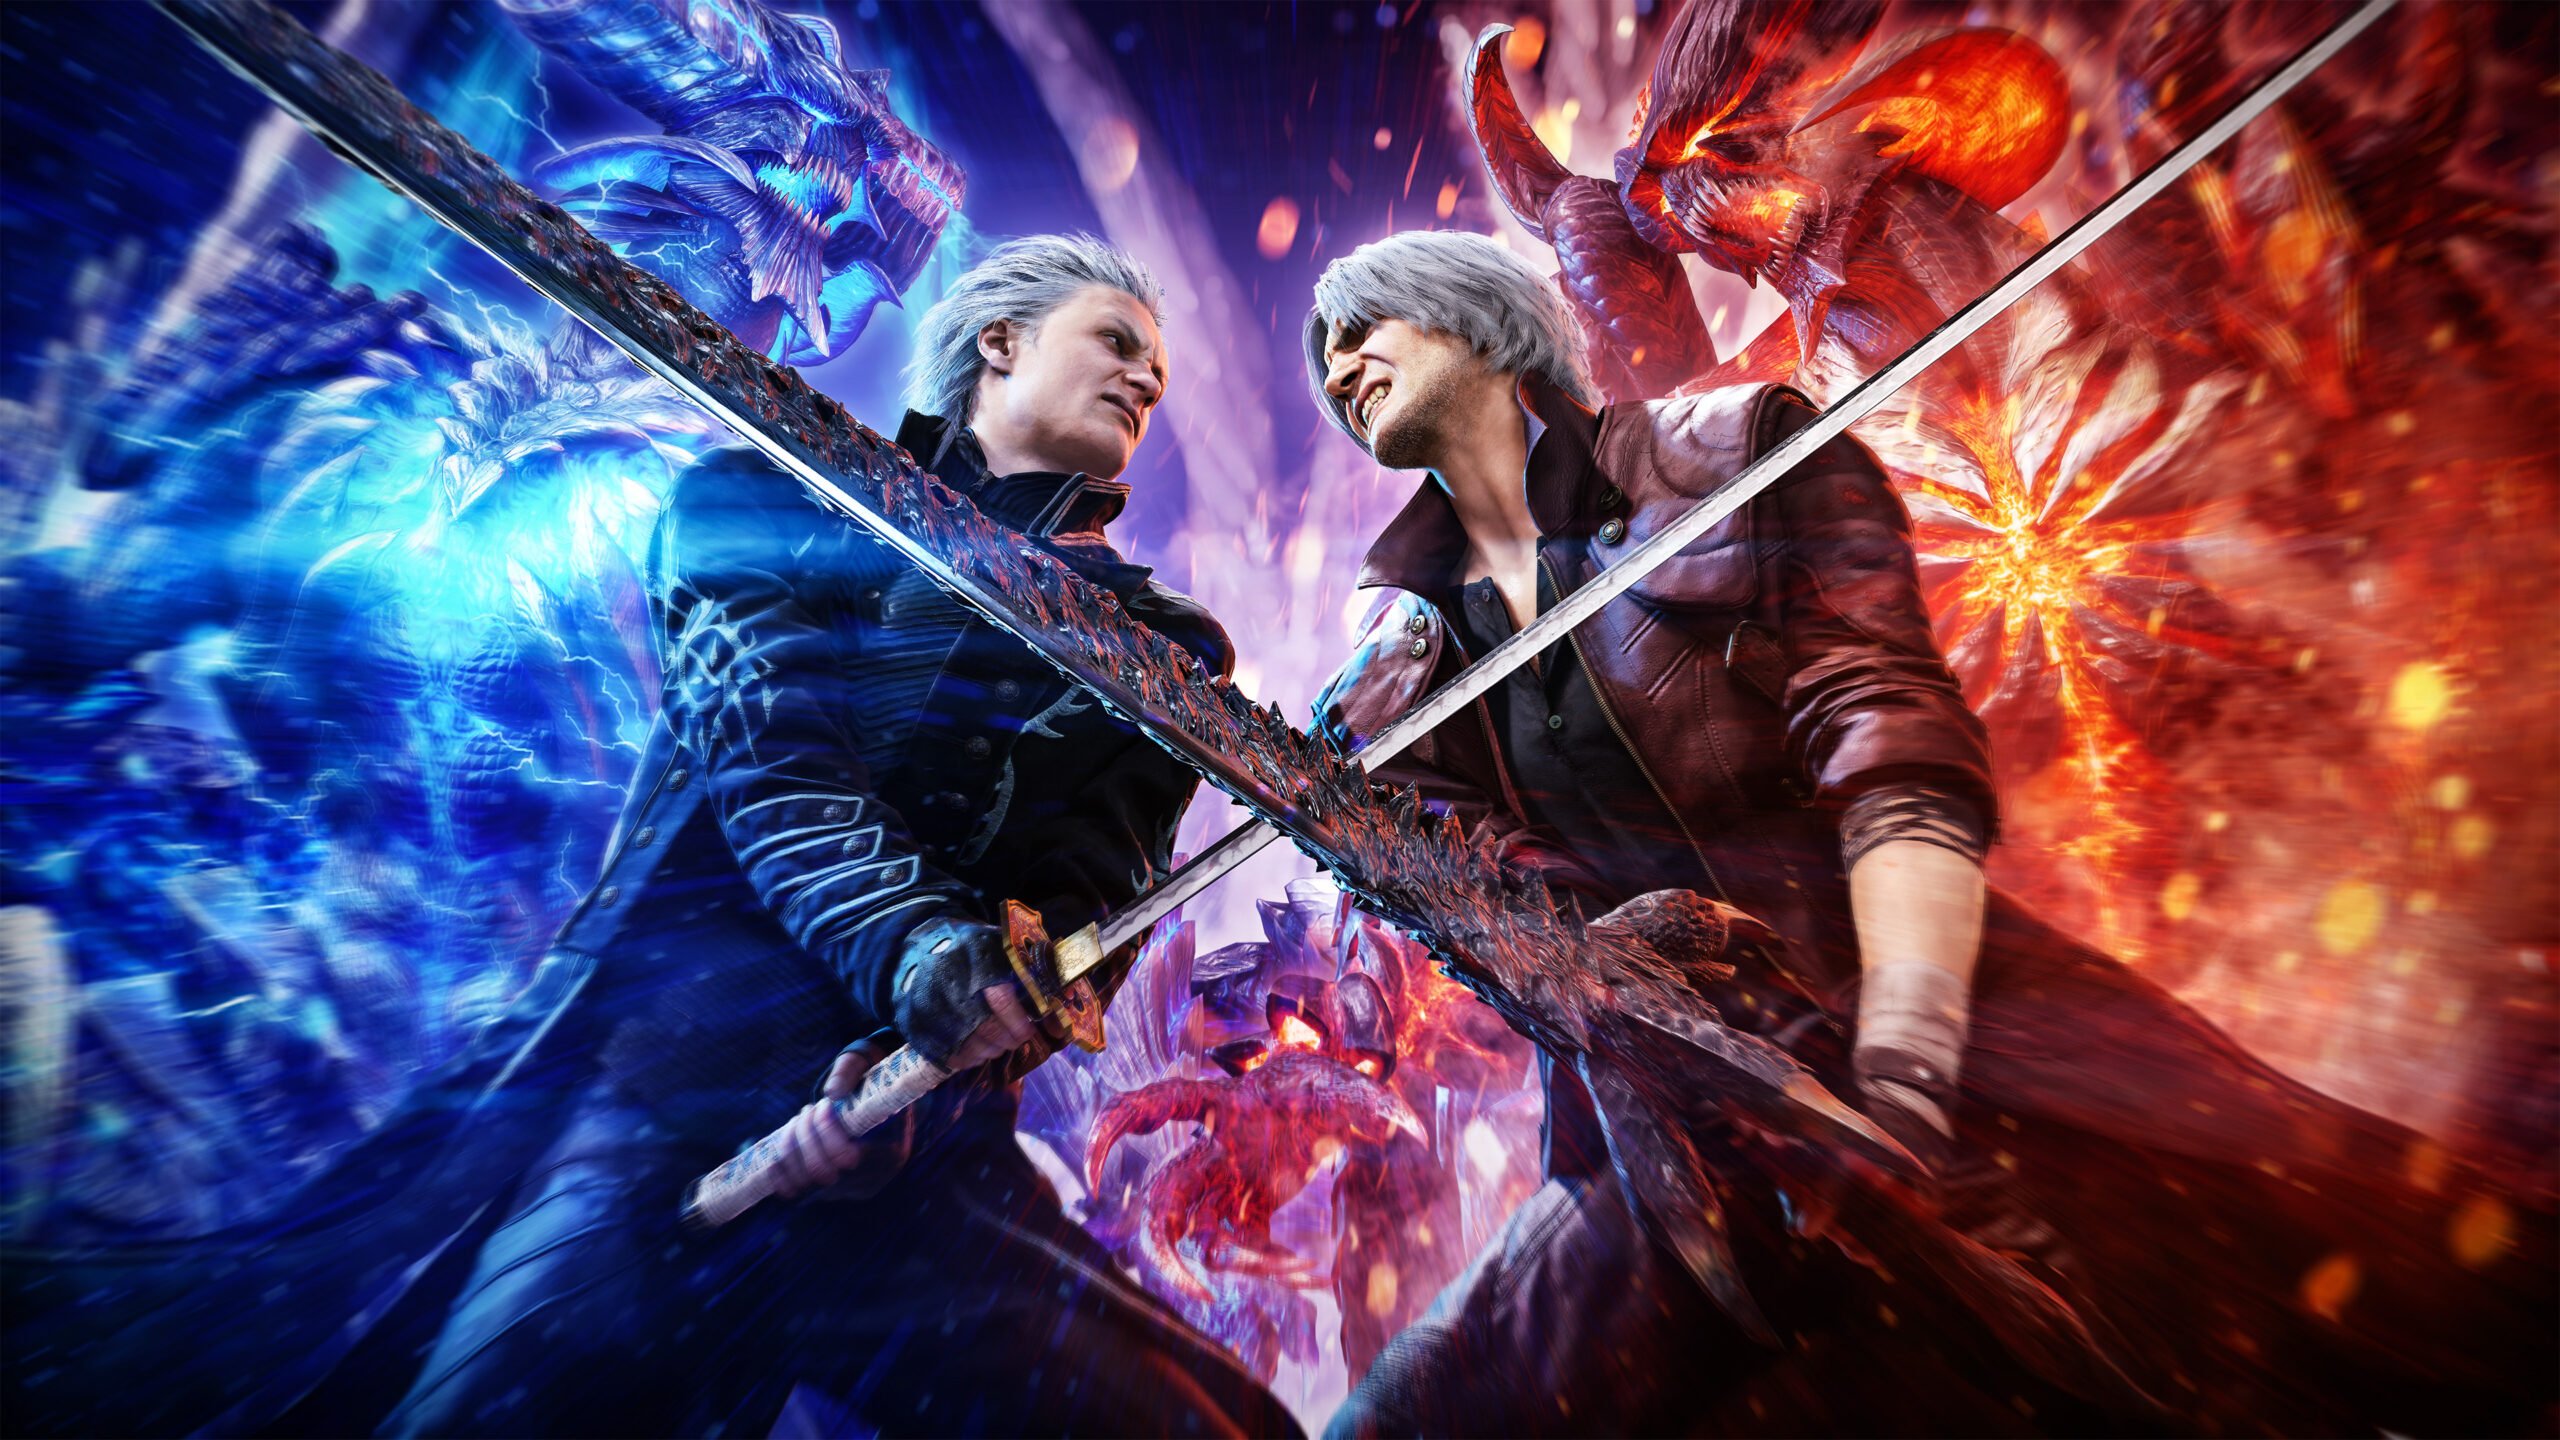 Devil May Cry 5 Special Edition digital pre-orders now available; Devil May  Cry 5 DLC 'Playable Character: Vergil' launches December 15 - Gematsu